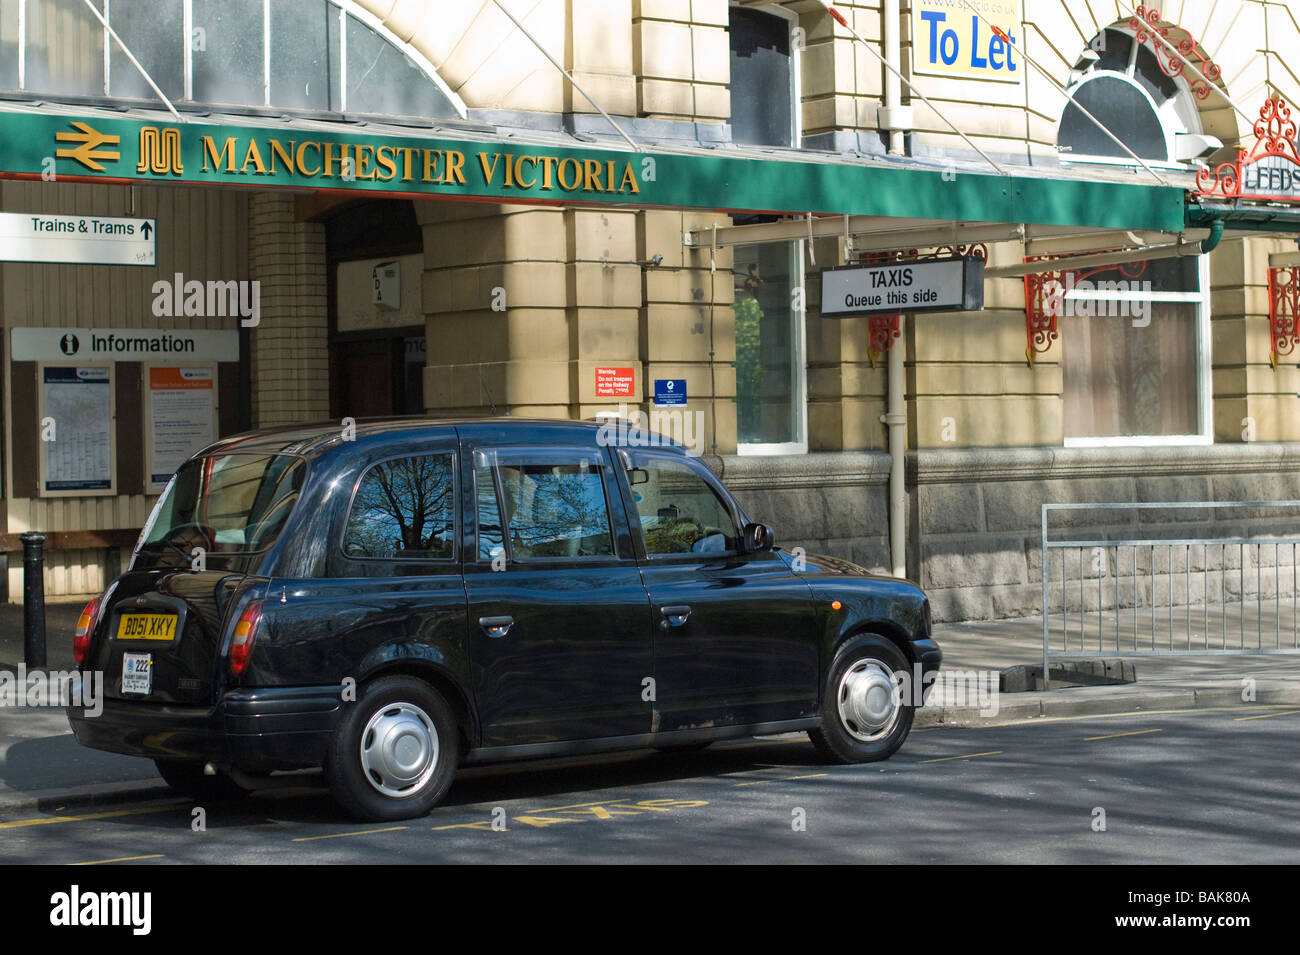 Taxi Cab at Manchester Victoria Station Stock Photo